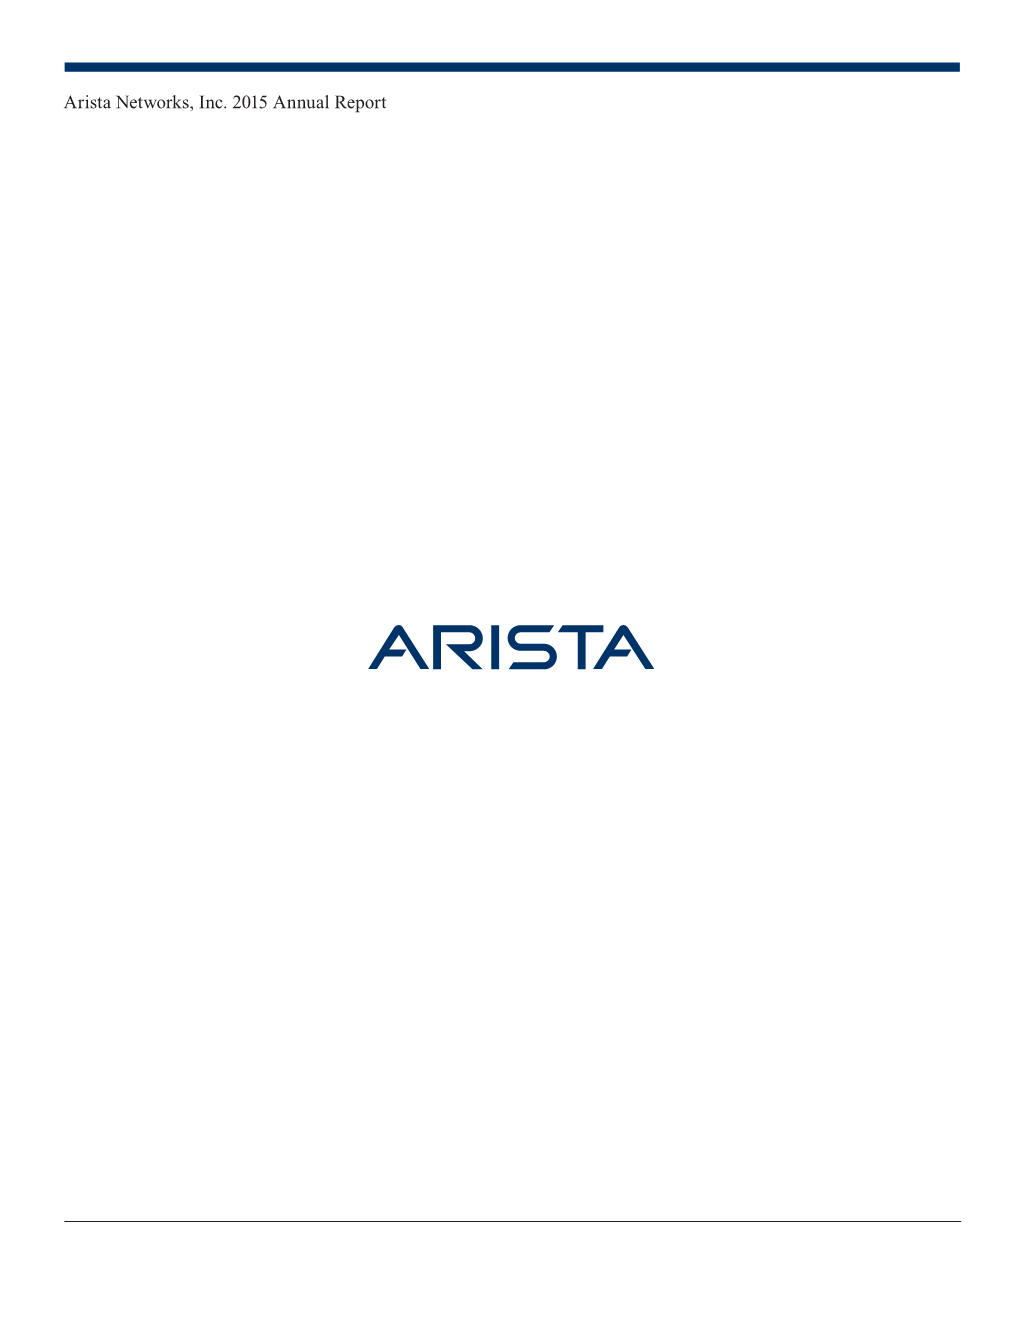 Arista Networks, Inc. 2015 Annual Report Dear Arista Networks Stockholders: I Am Pleased to Report That Arista Networks Had a Very Successful 2015 Fiscal Year